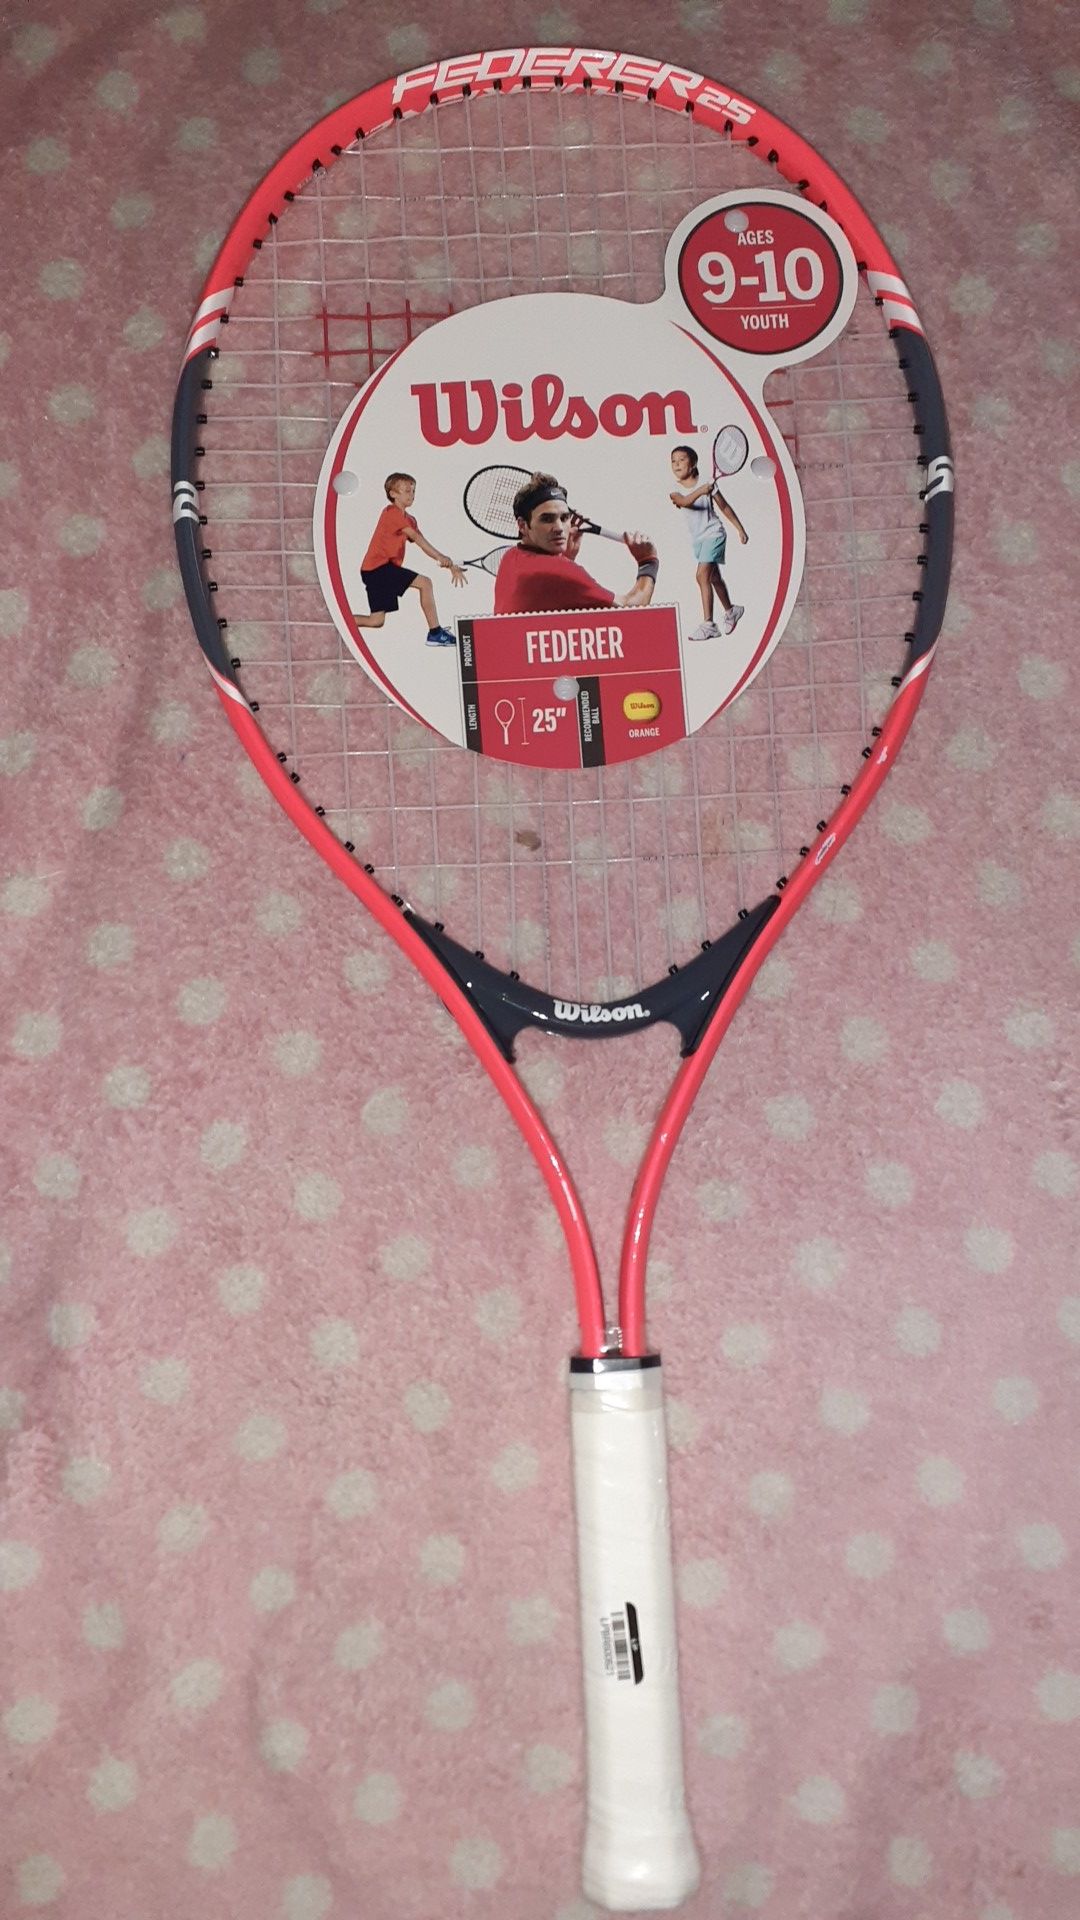 Wilson Federer 25 in tennis racket ages 9 to 10 youth kids tennis racket